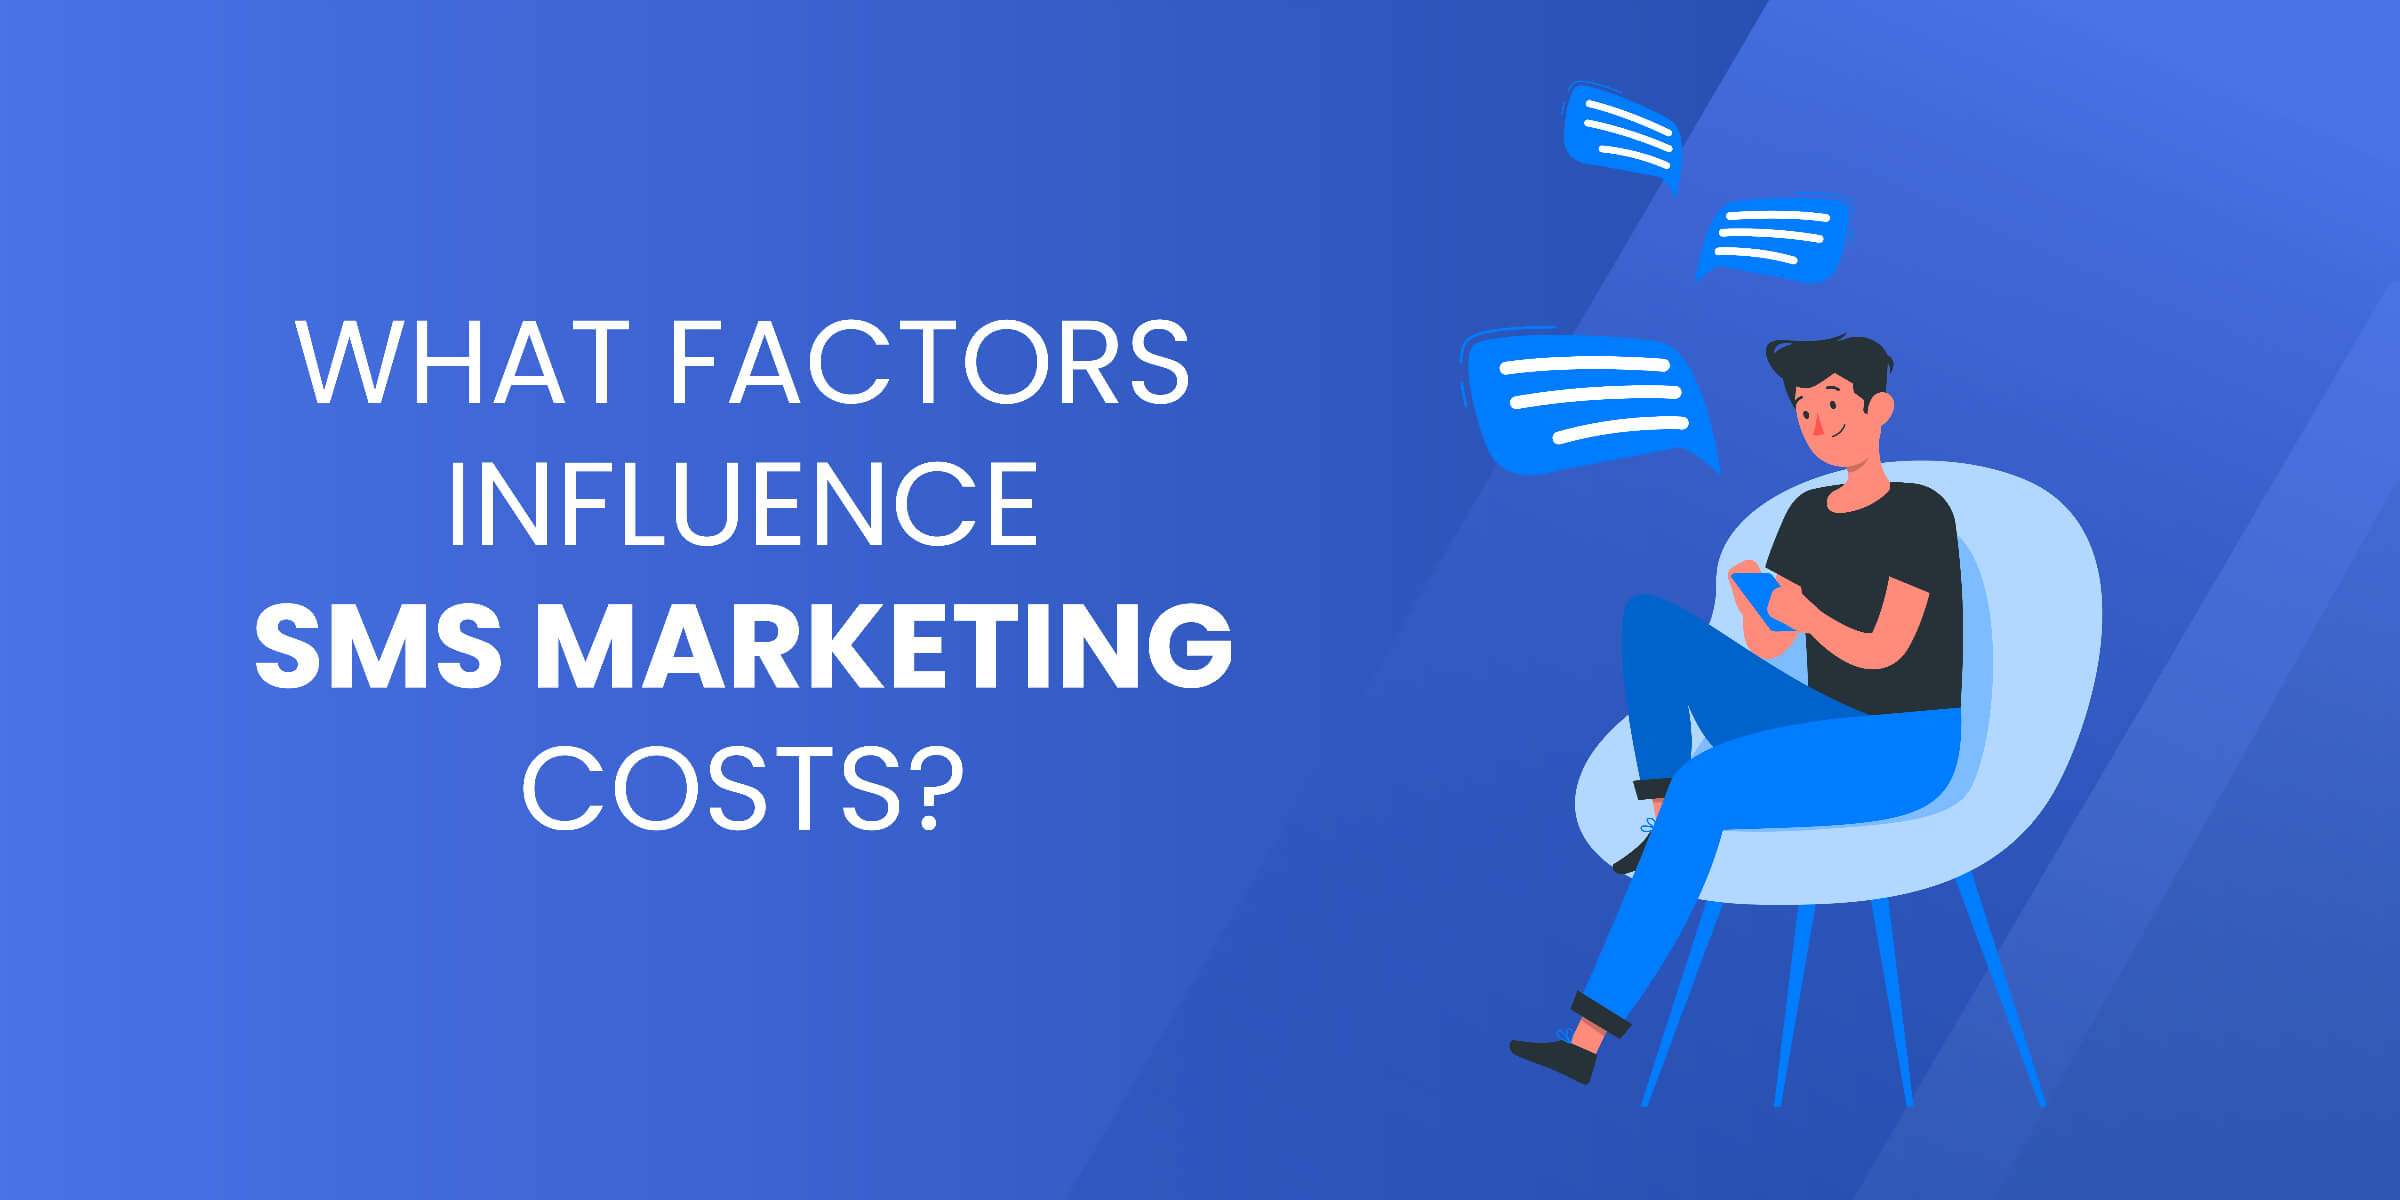 What Factors Influence SMS Marketing Costs